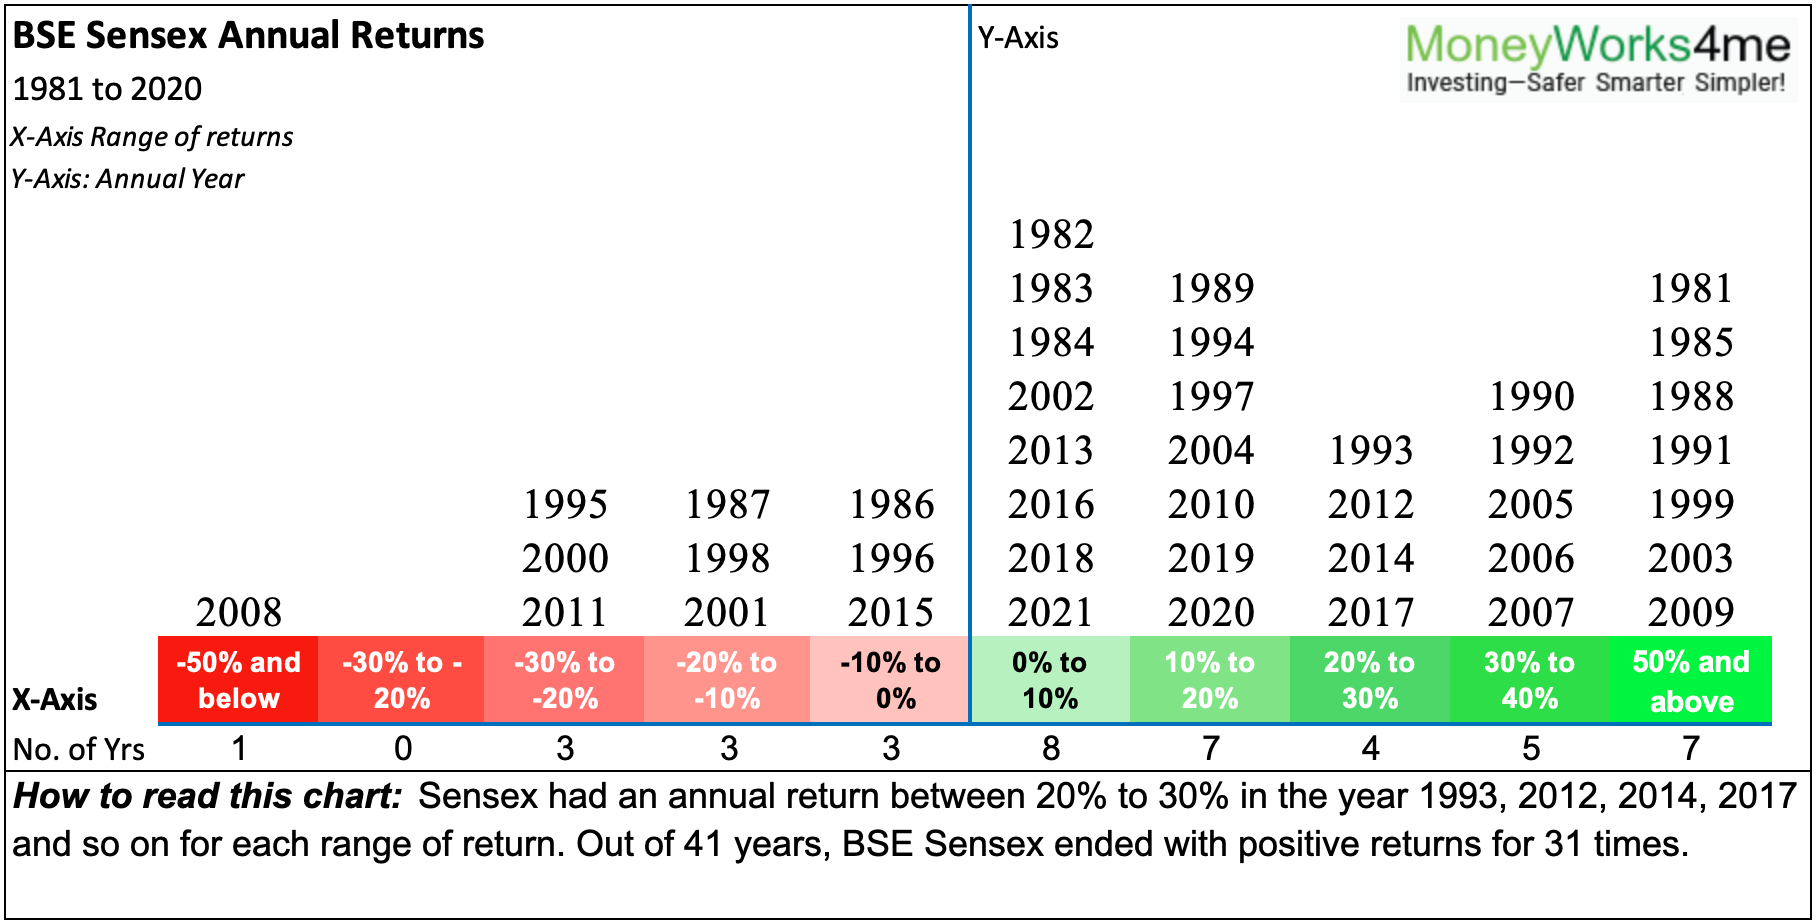 bse sensex annual returns from 1981-2020